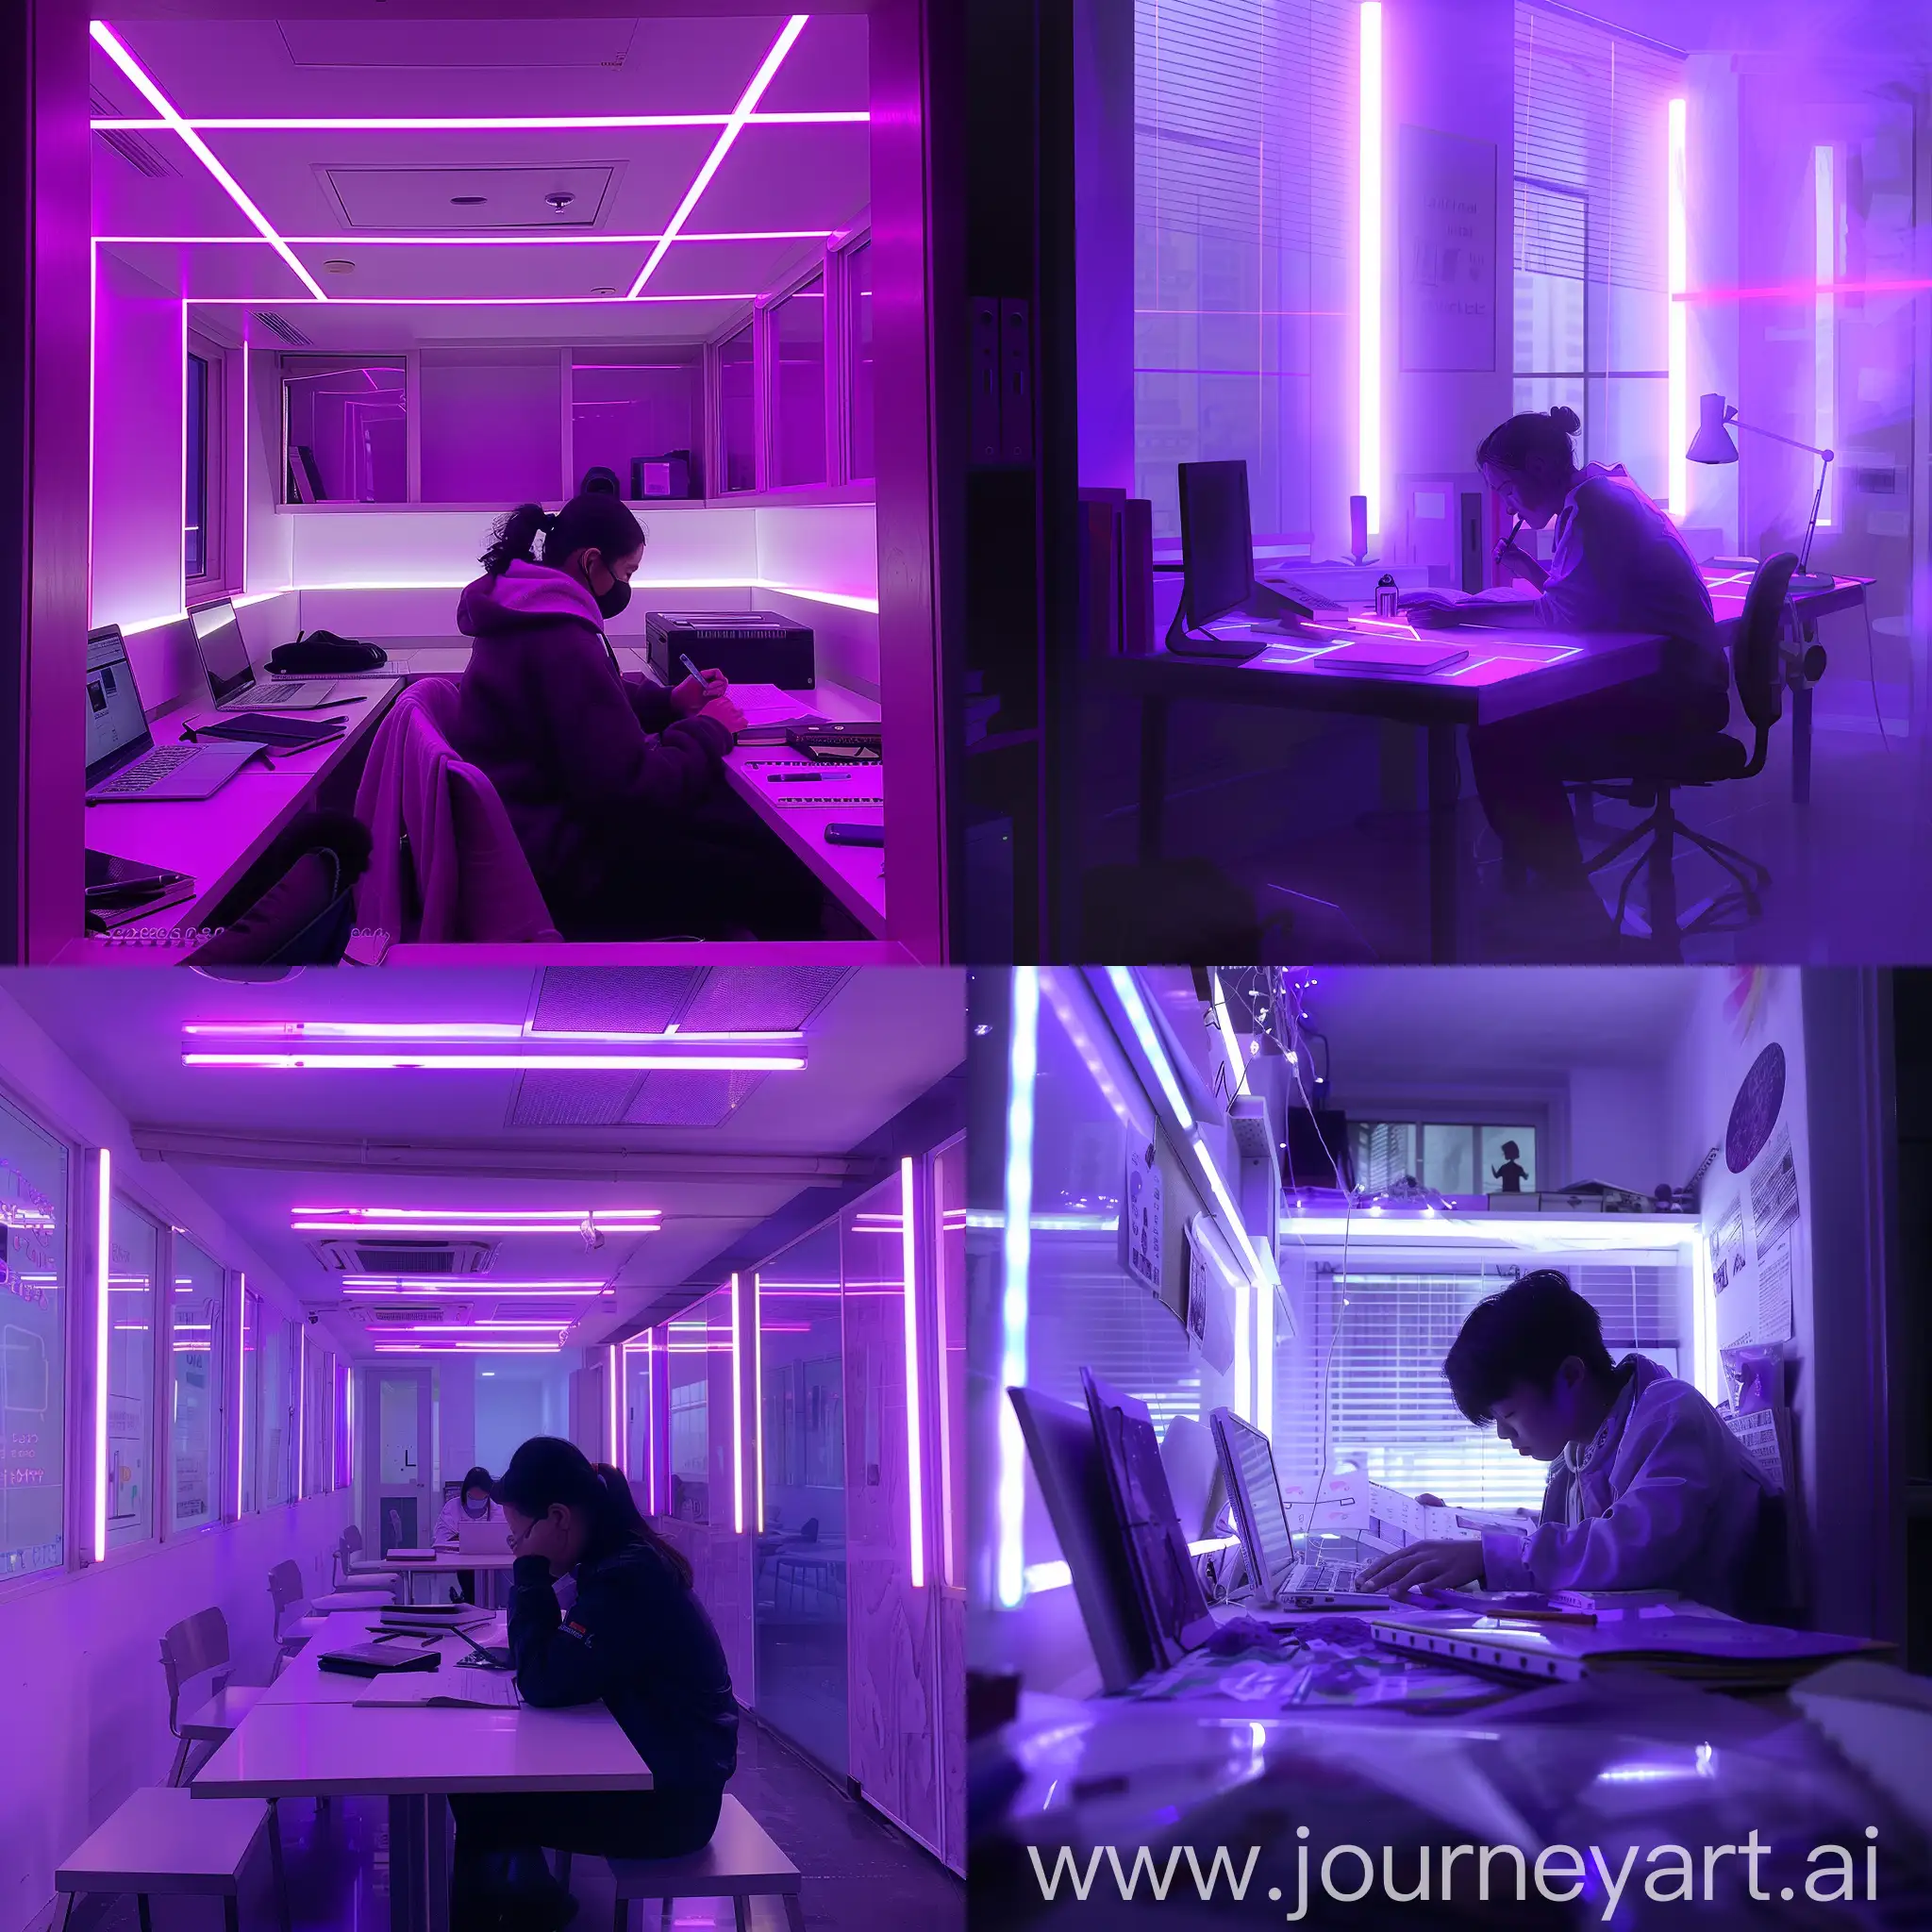 A study room with purple and white lights where a diligent student is deeply engrossed in studying. - - ar 9:16